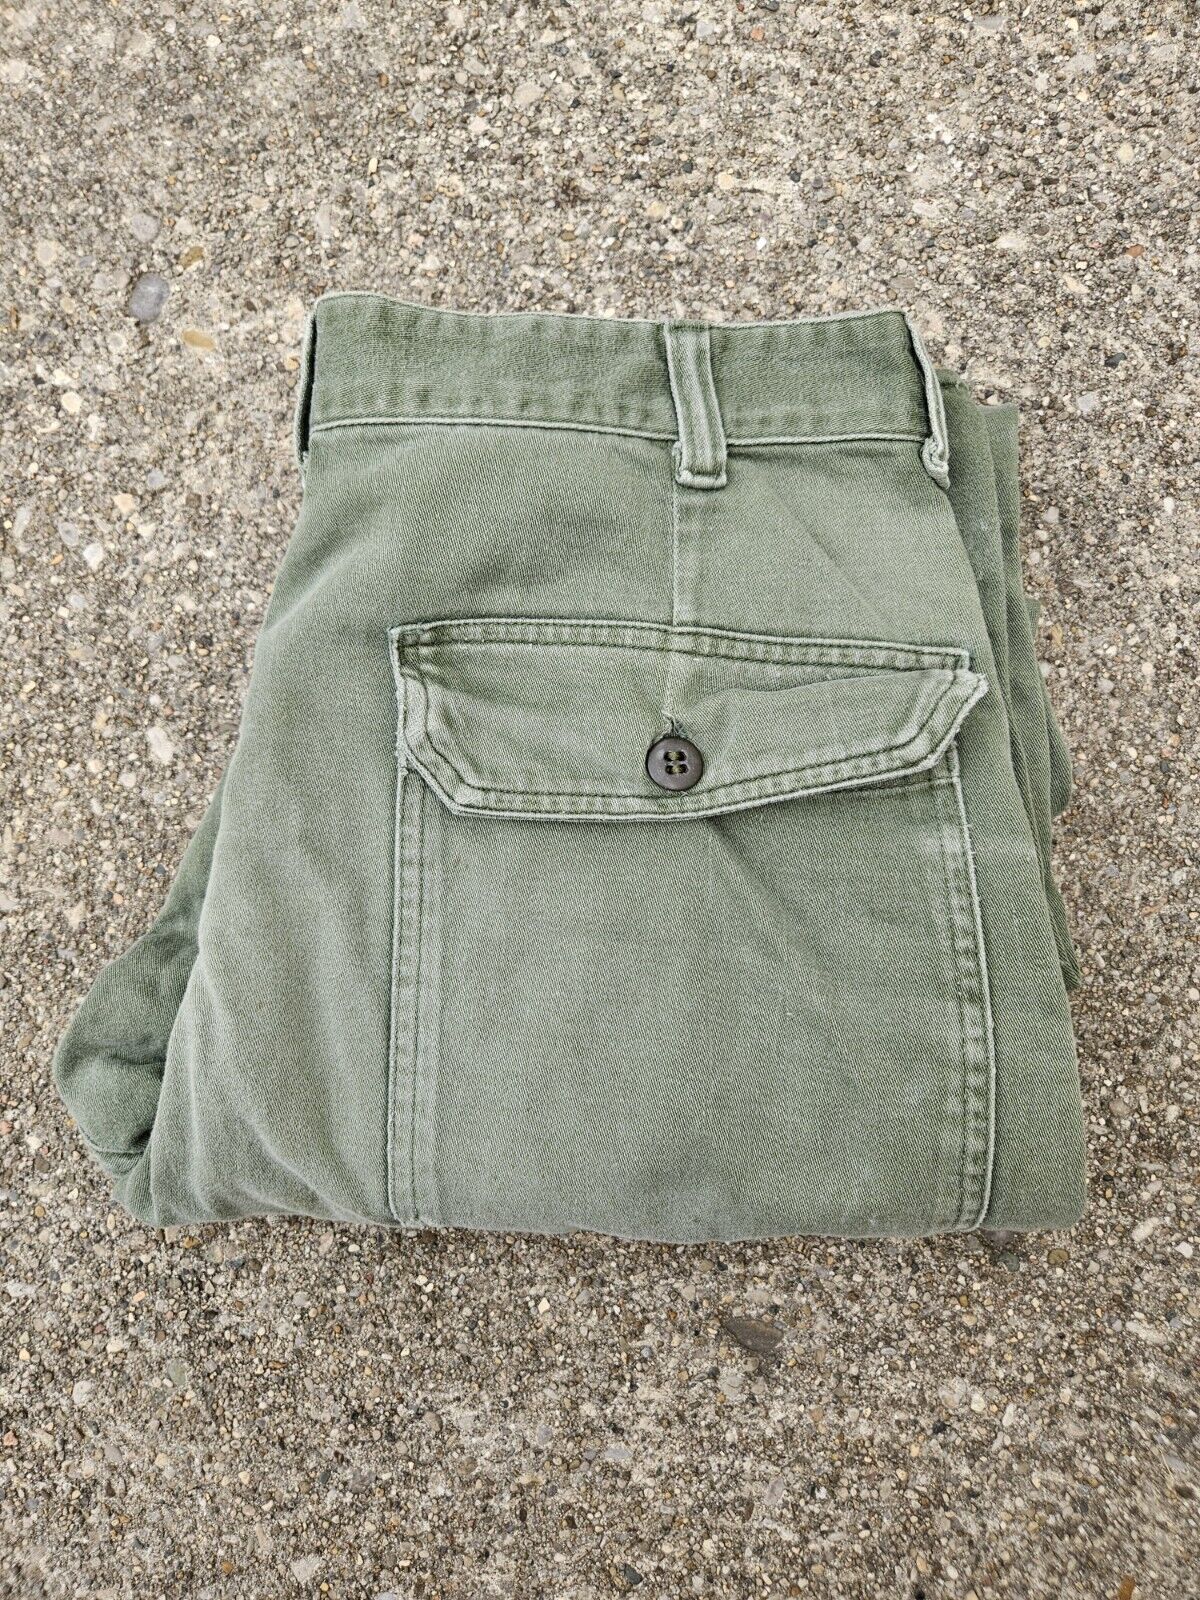 Vintage Military Vietnam OG 107 Trousers Size 32 X 28.5 Distressed